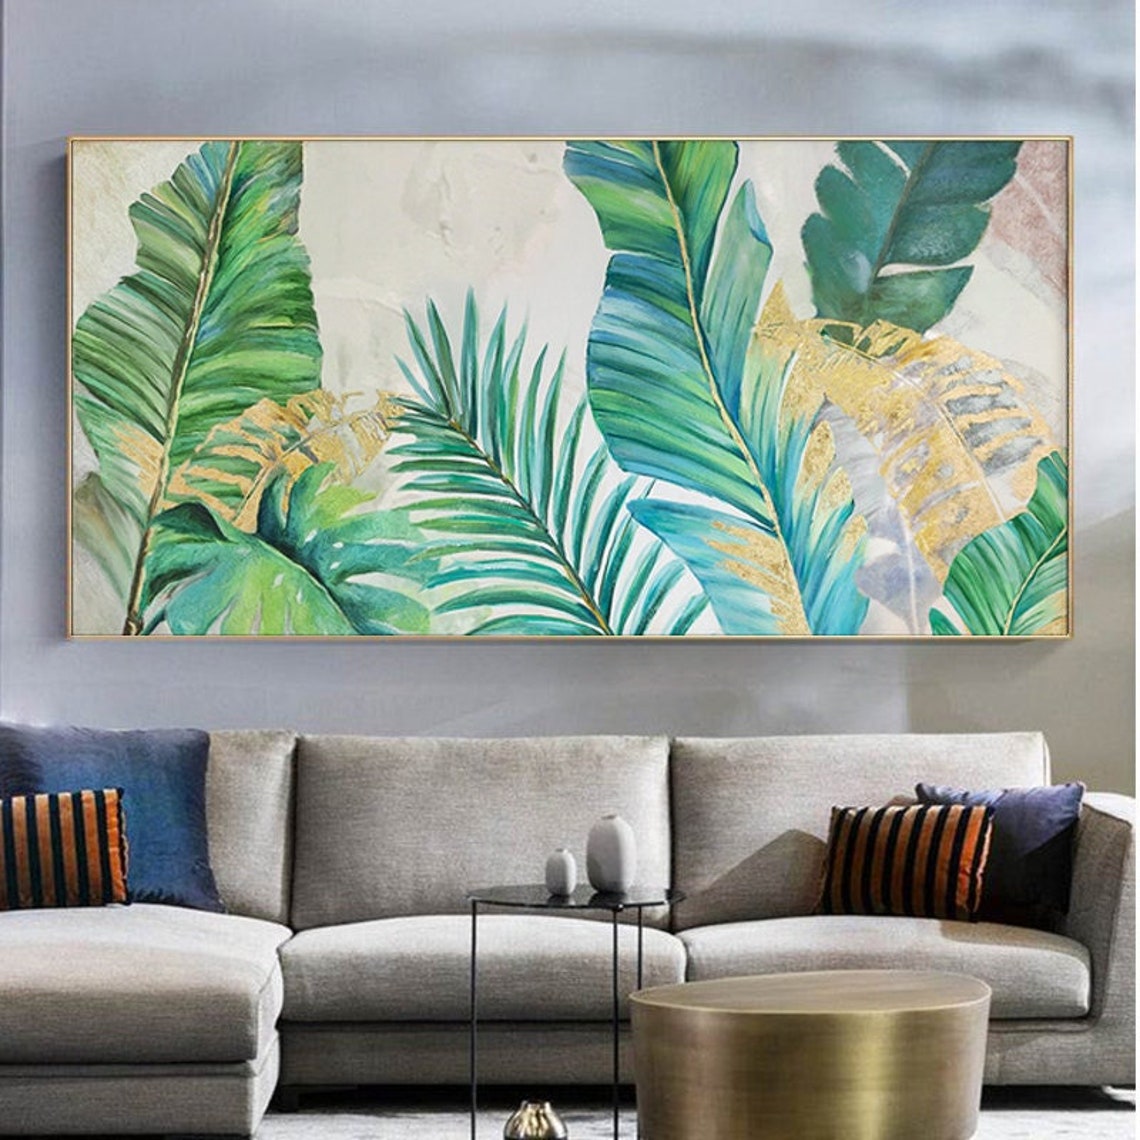 Large Abstract Green Banana Leaf Oil Painting on Canvas - Etsy